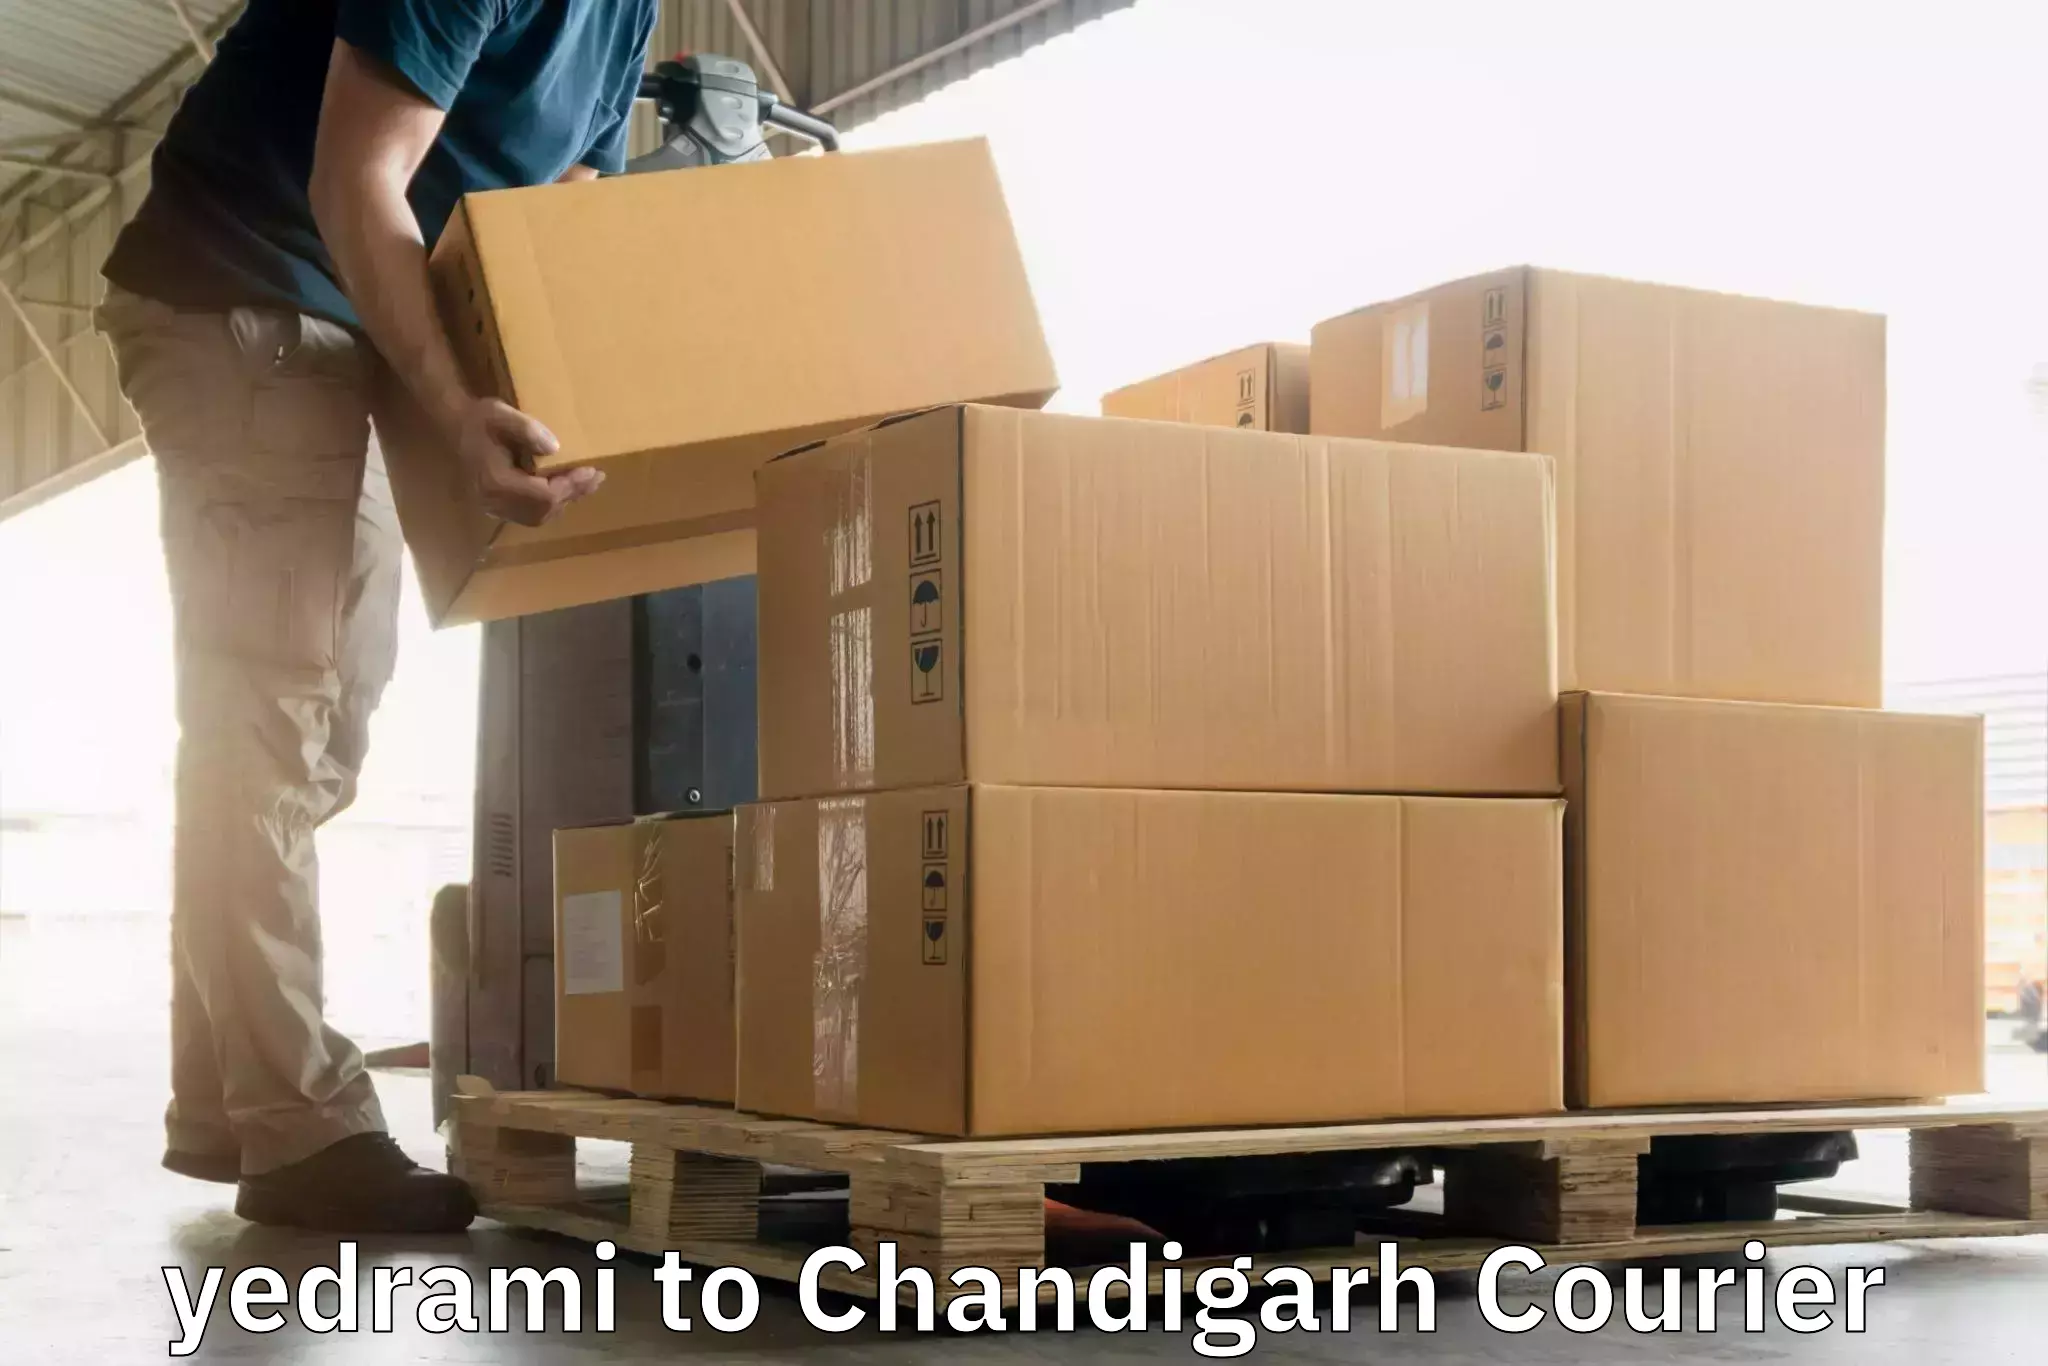 Postal and courier services yedrami to Chandigarh